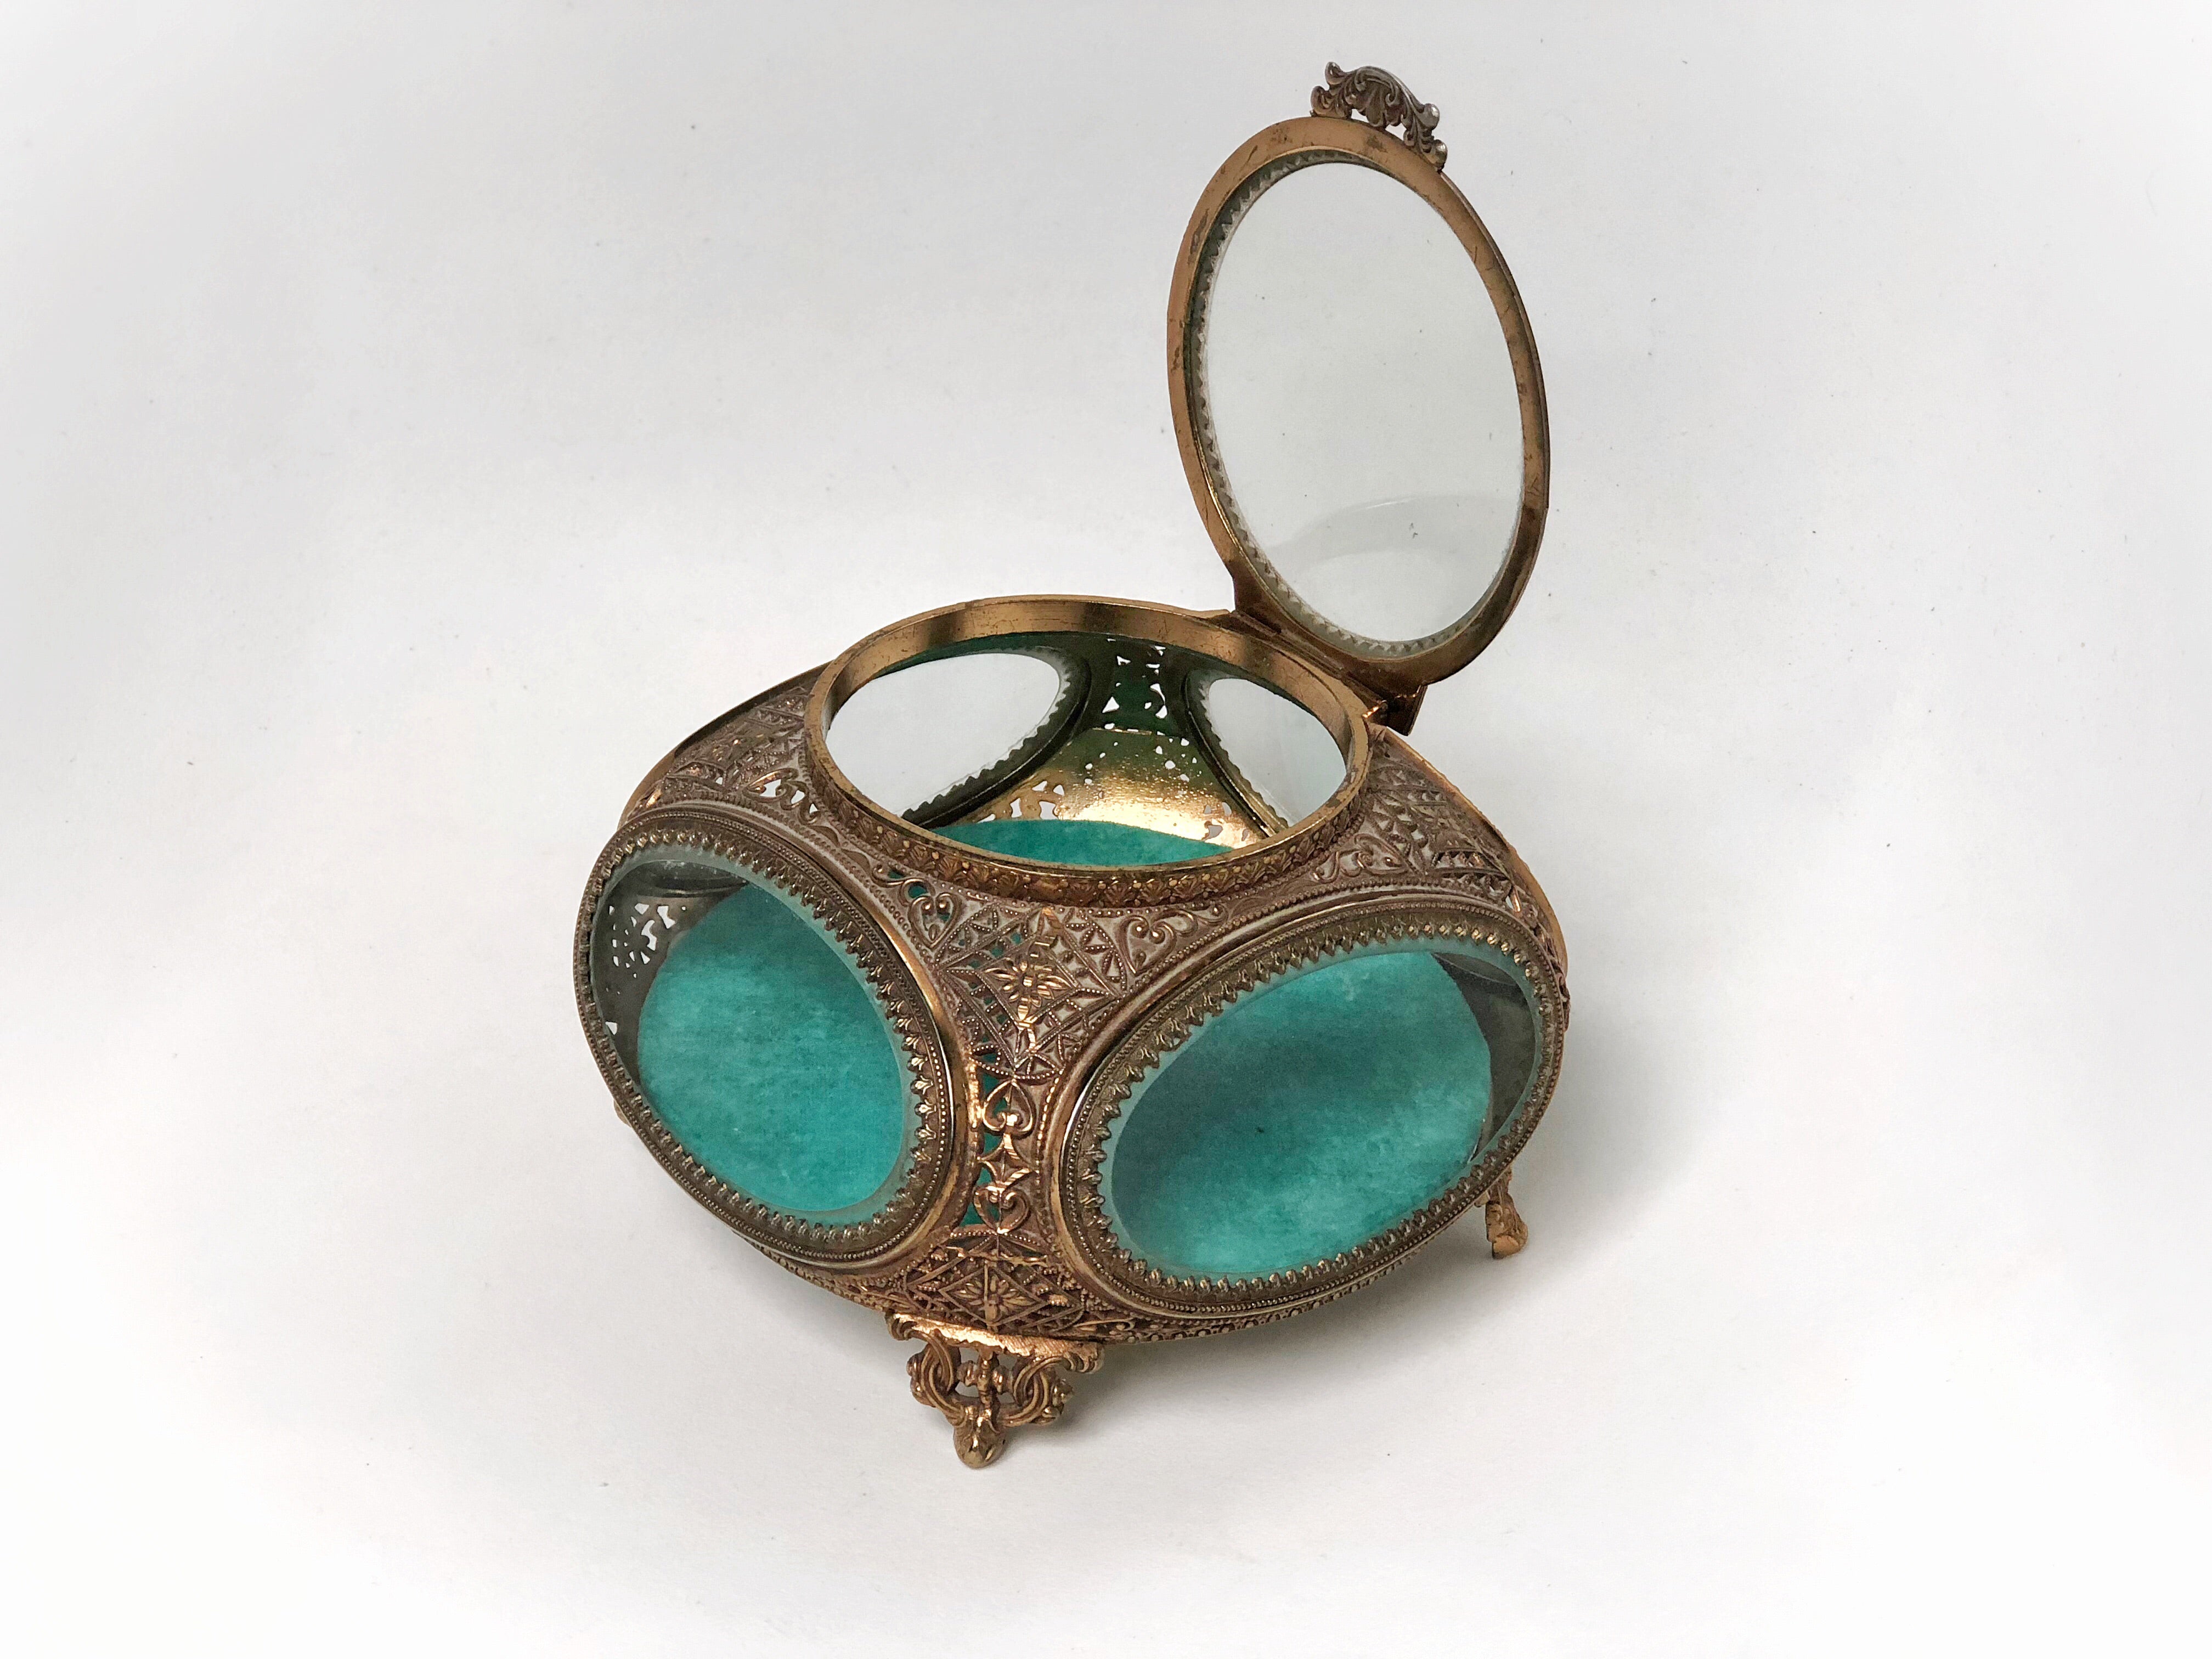 Antique Teal Jewelry Box